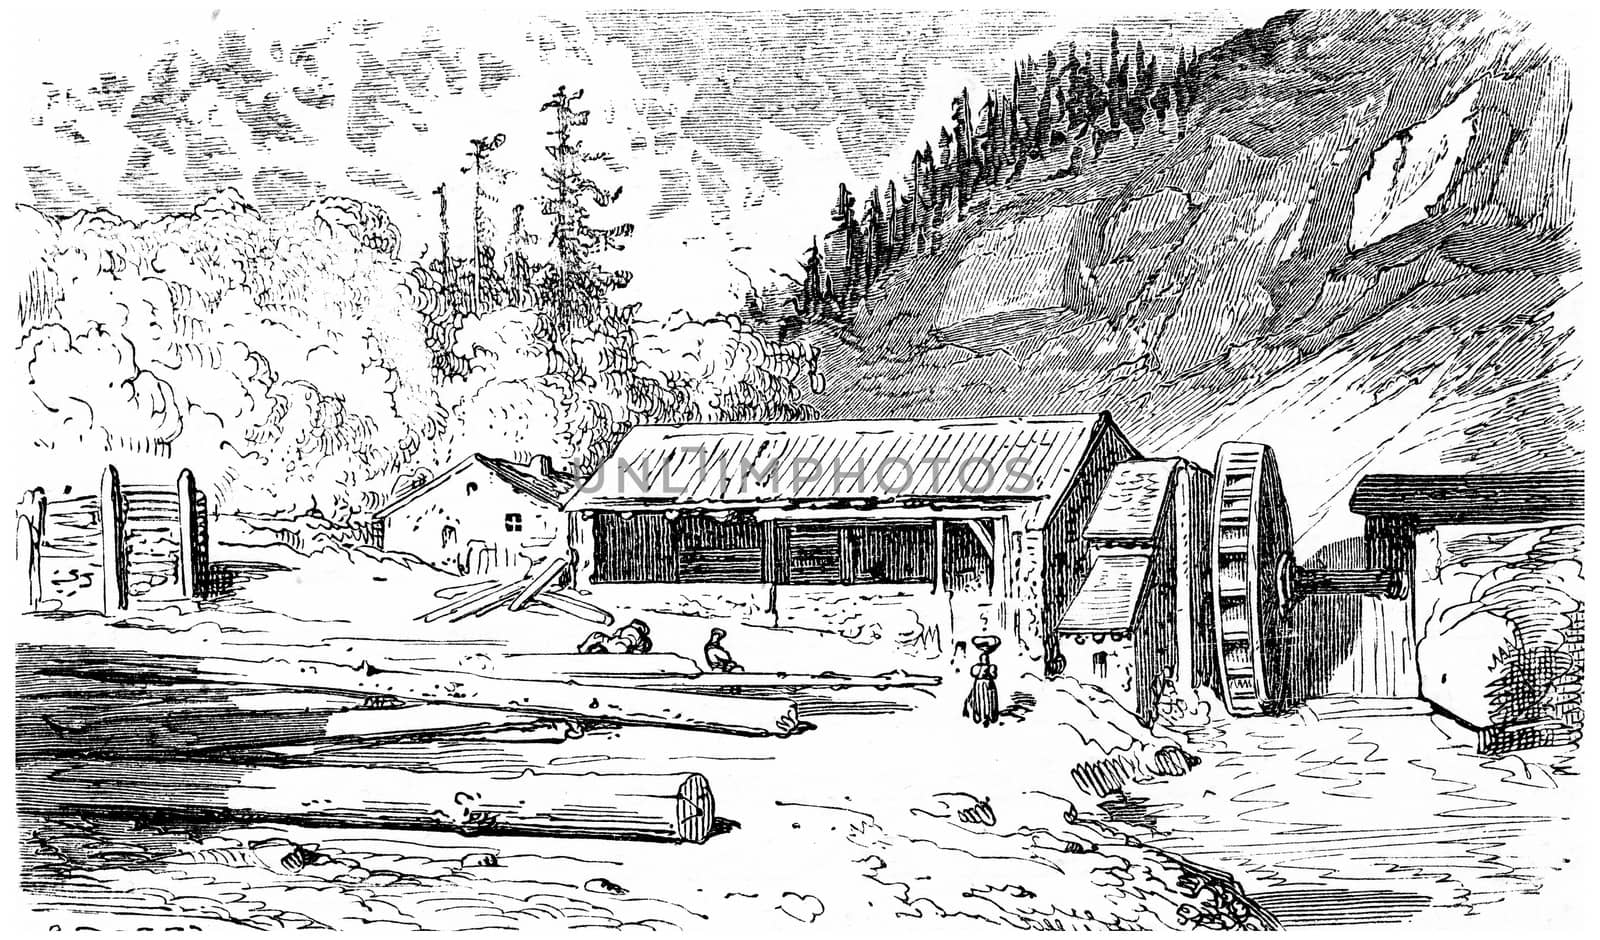 The sawmill, vintage engraved illustration. From Chemin des Ecoliers, 1861.
